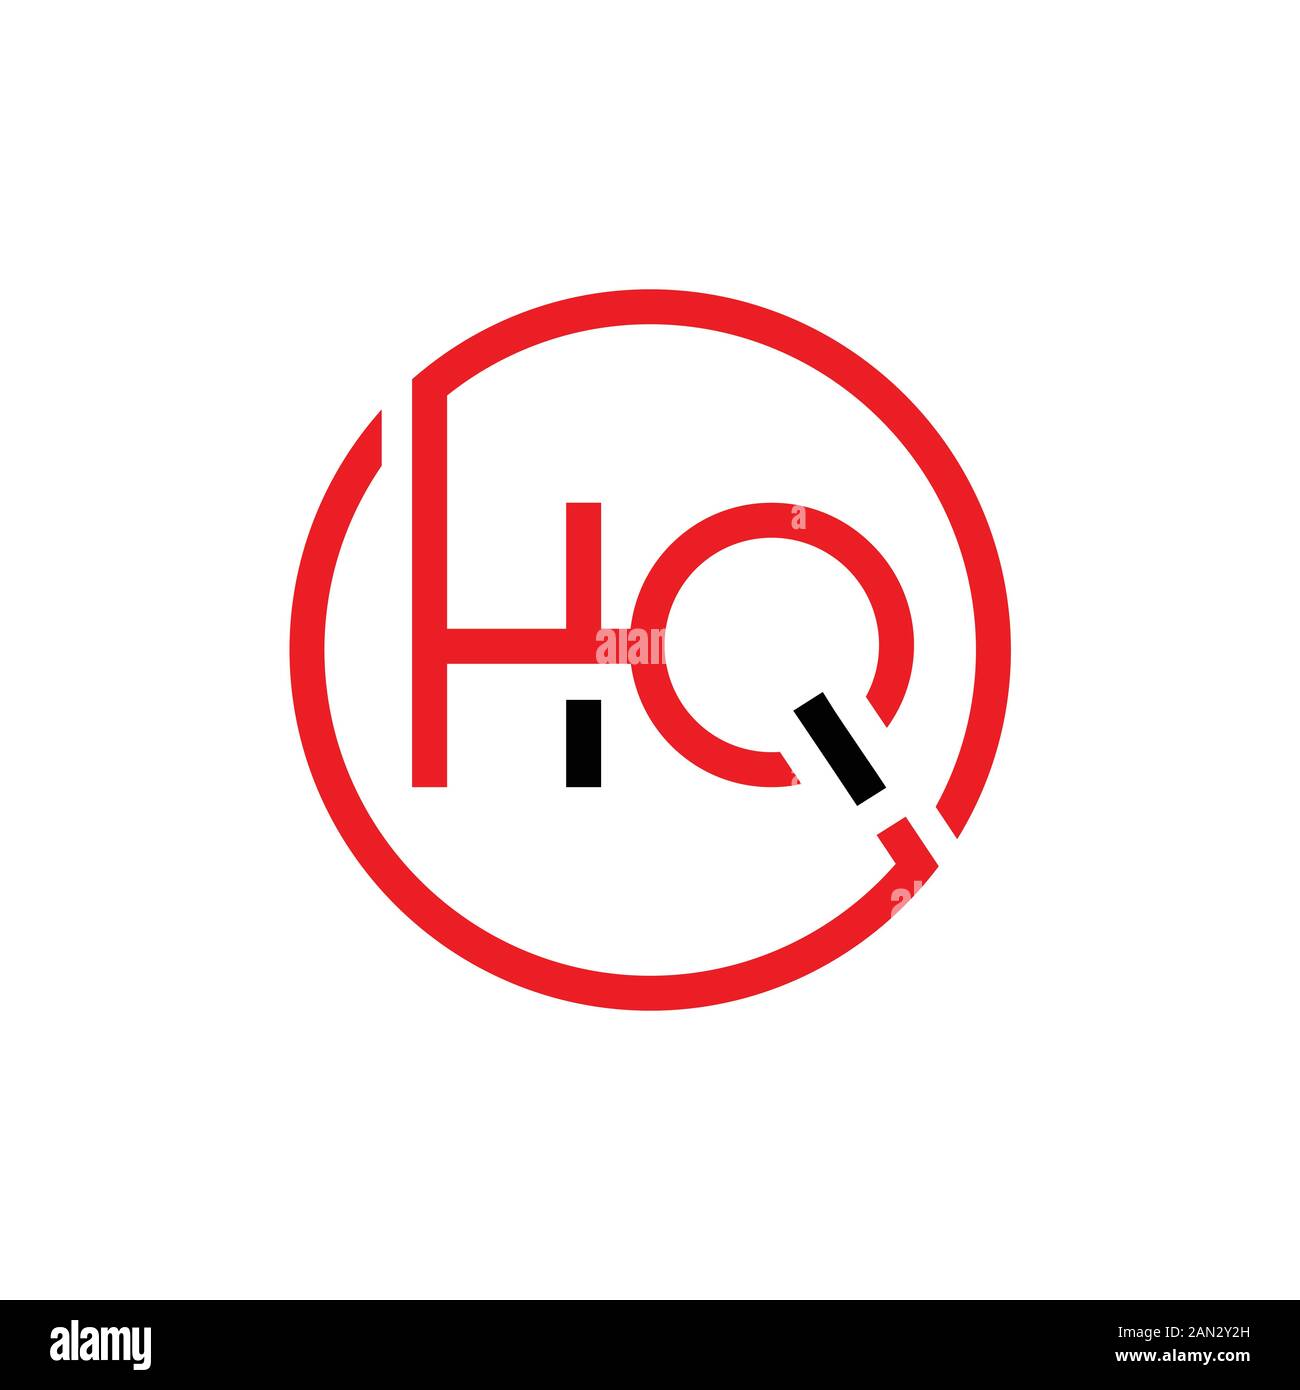 letter HQ Logo Design Linked Vector Template With Red And Black. Initial HQ Vector Illustration Stock Vector